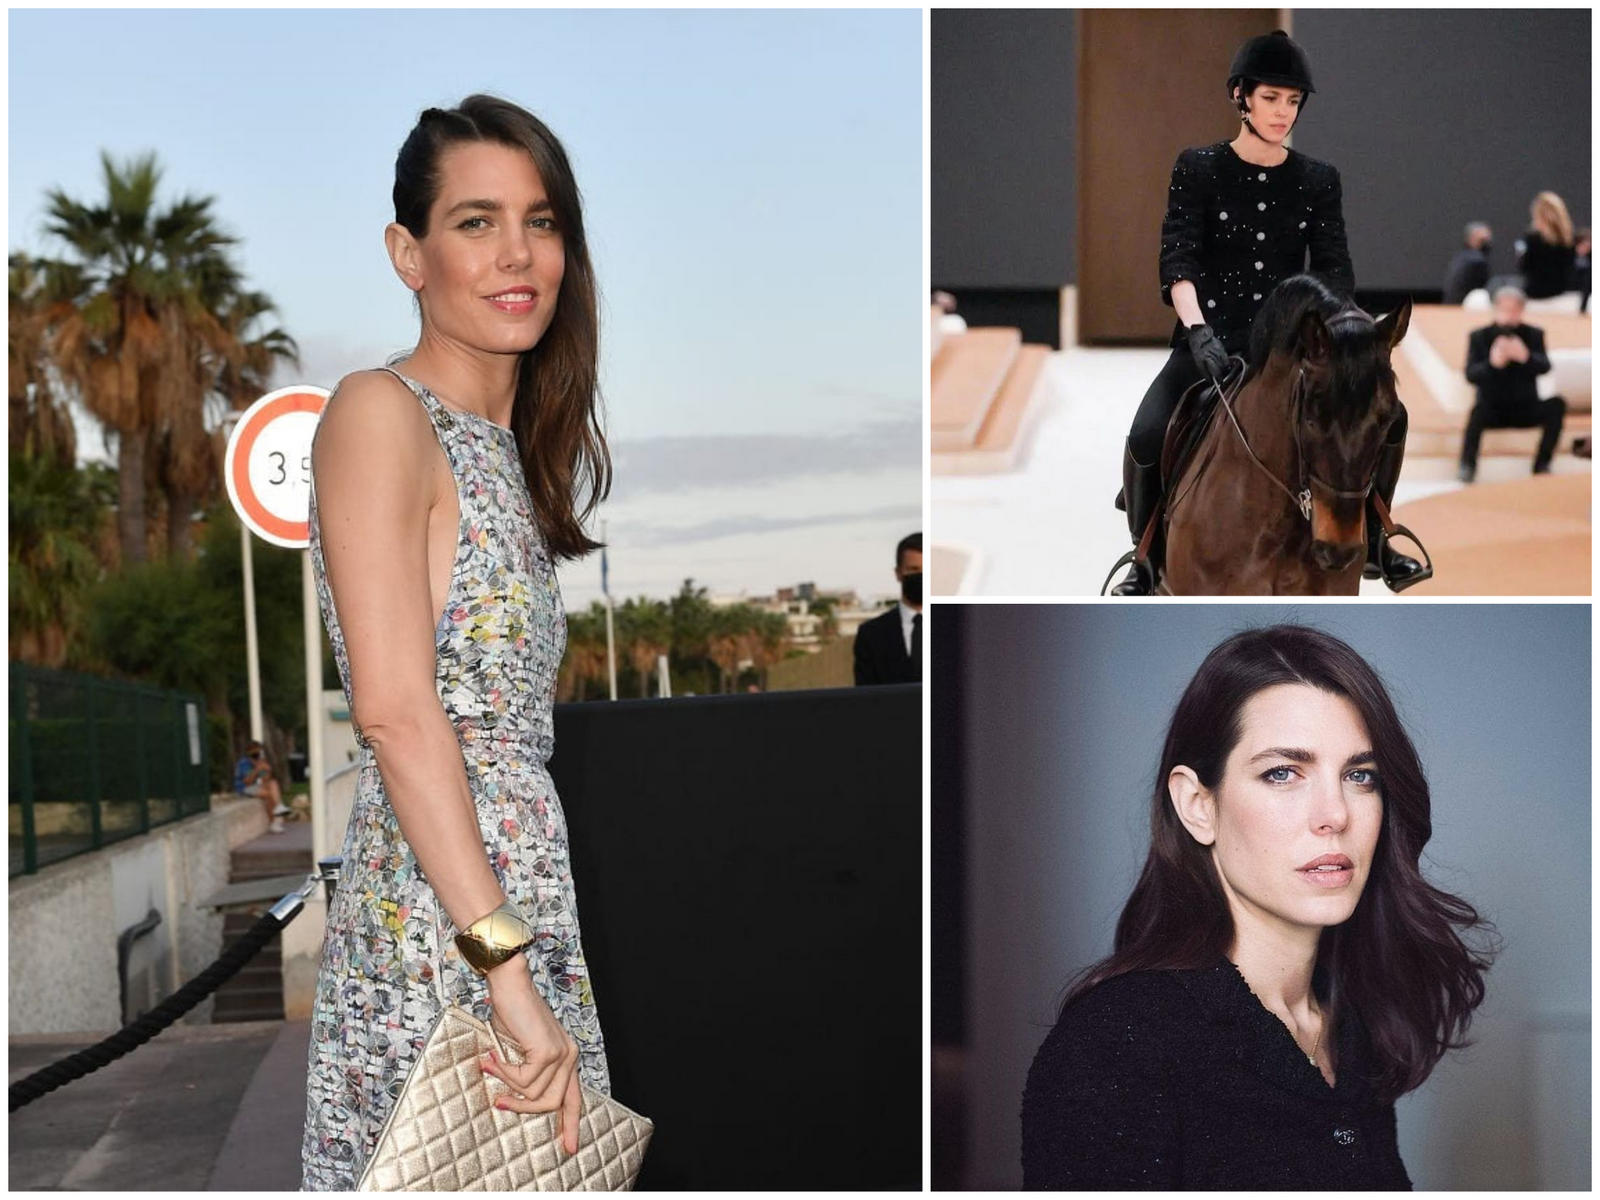 First look at Monaco Royal Charlotte Casiraghi as the new face of